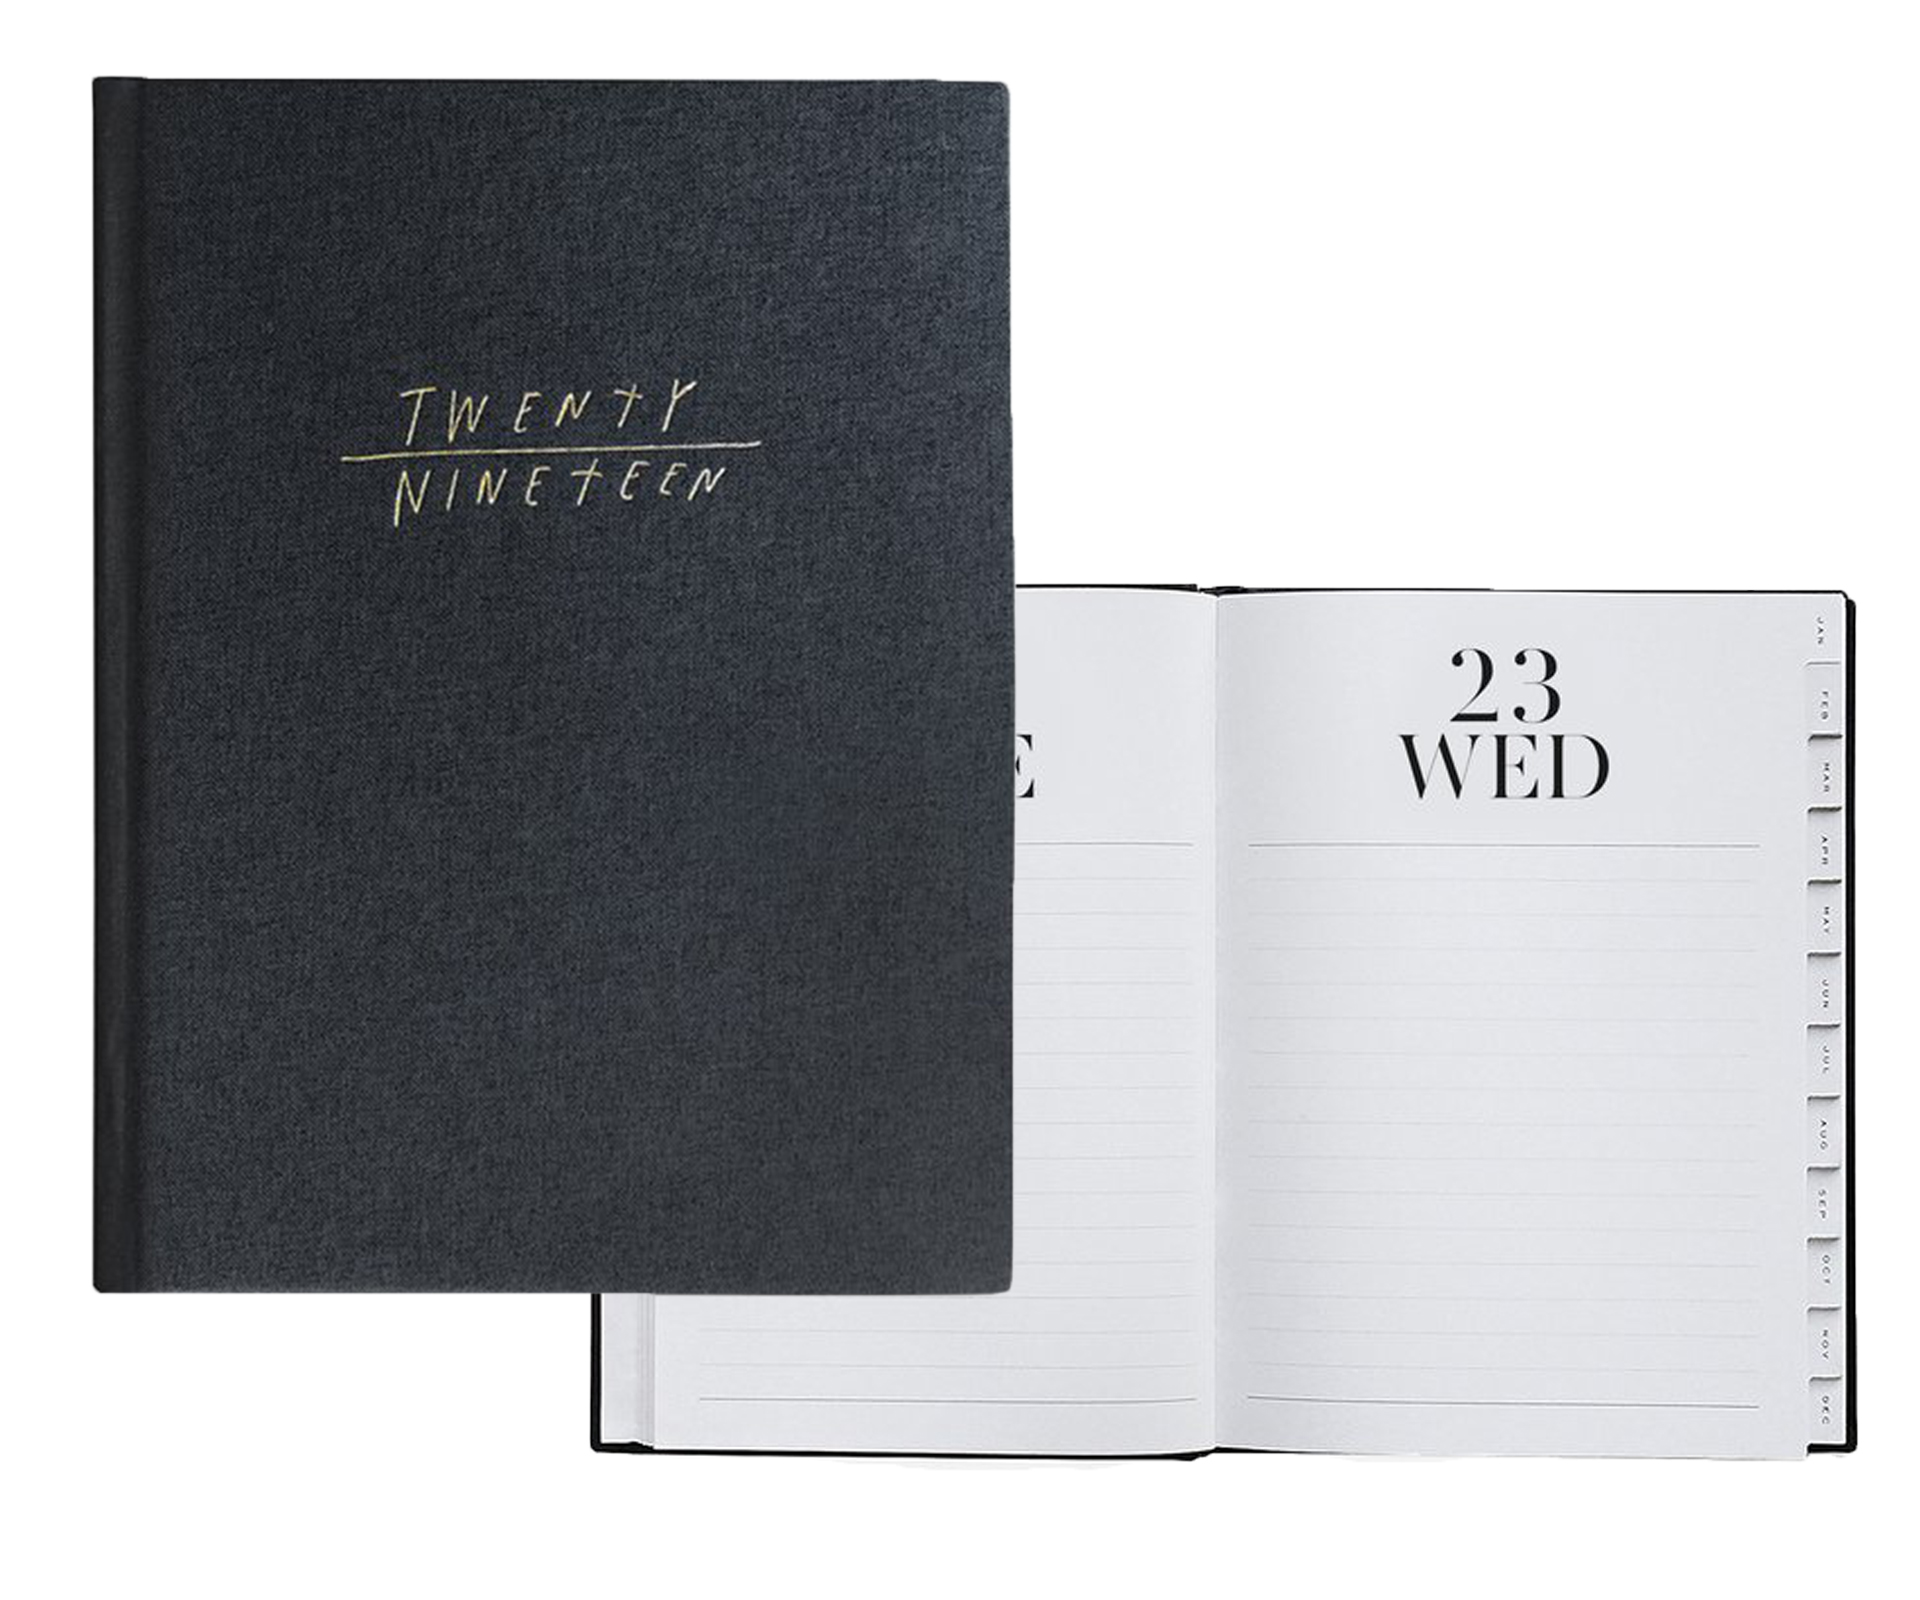 Blacklist 2019 desk diary With a beautiful, thick hardcover and full pages dedicated to each day, easily accessed through side tabs, this large daily diary is designed to sit proudly on a desk. $75.90 from Pepa Stationery.